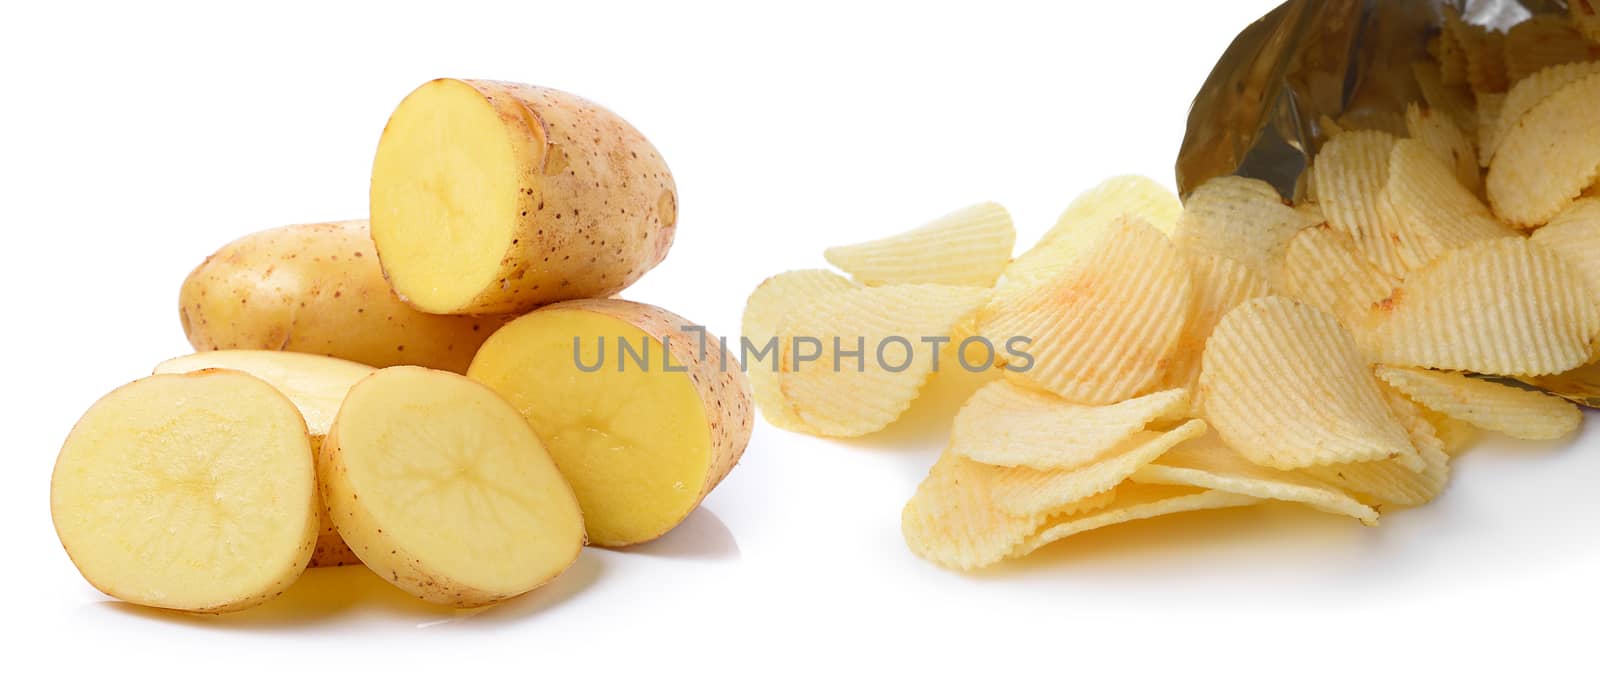 potato and Potato chips isolated on white background